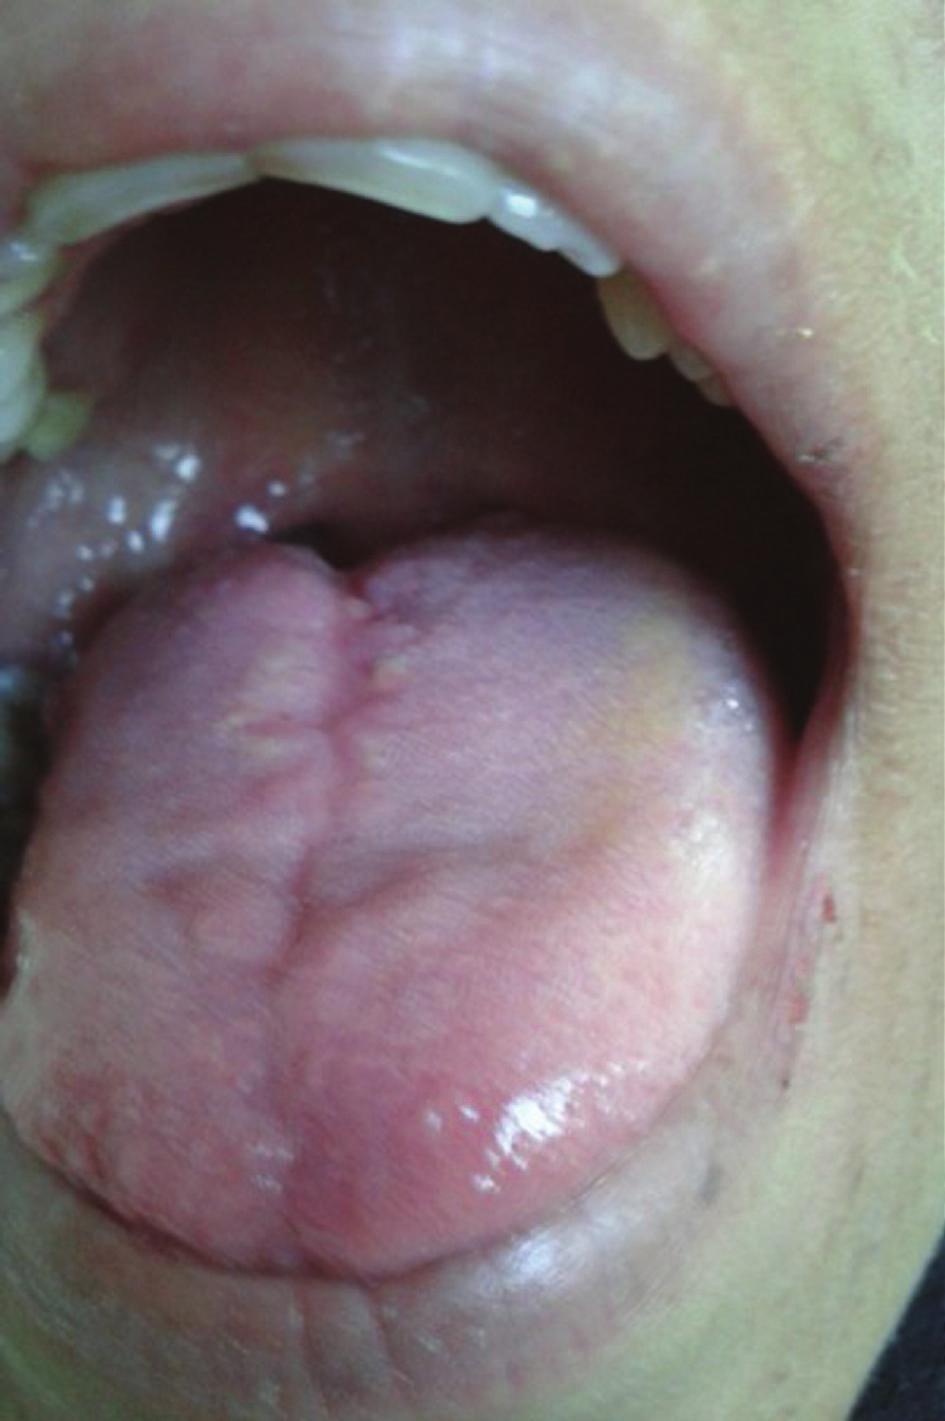 Patient was started on oral feeding on the first postoperative day and was decannulated on the 5th day.